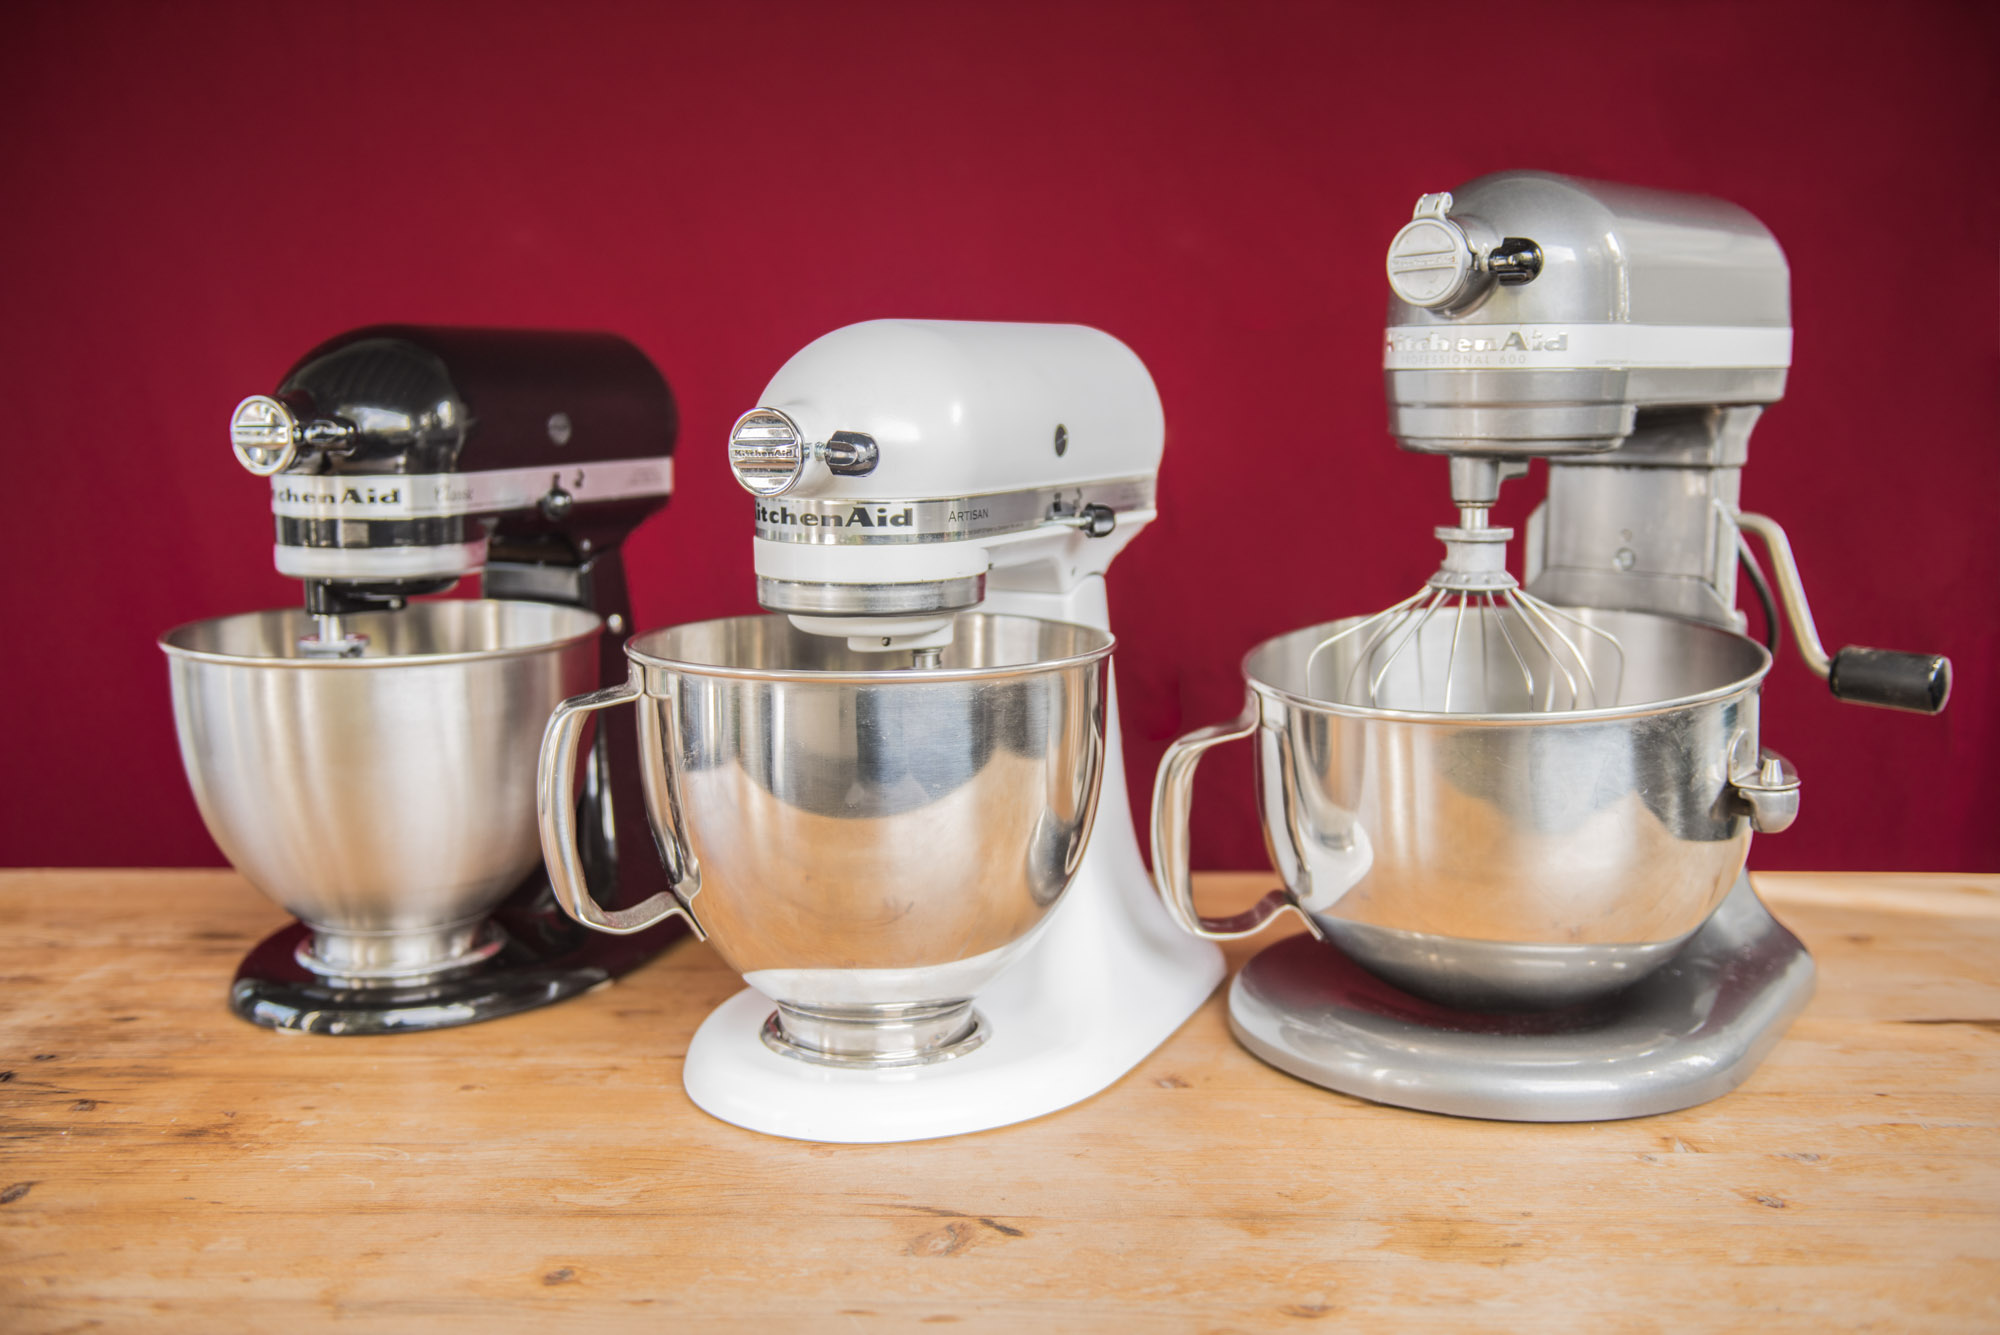 The 9 Best KitchenAid Mixers in 2022